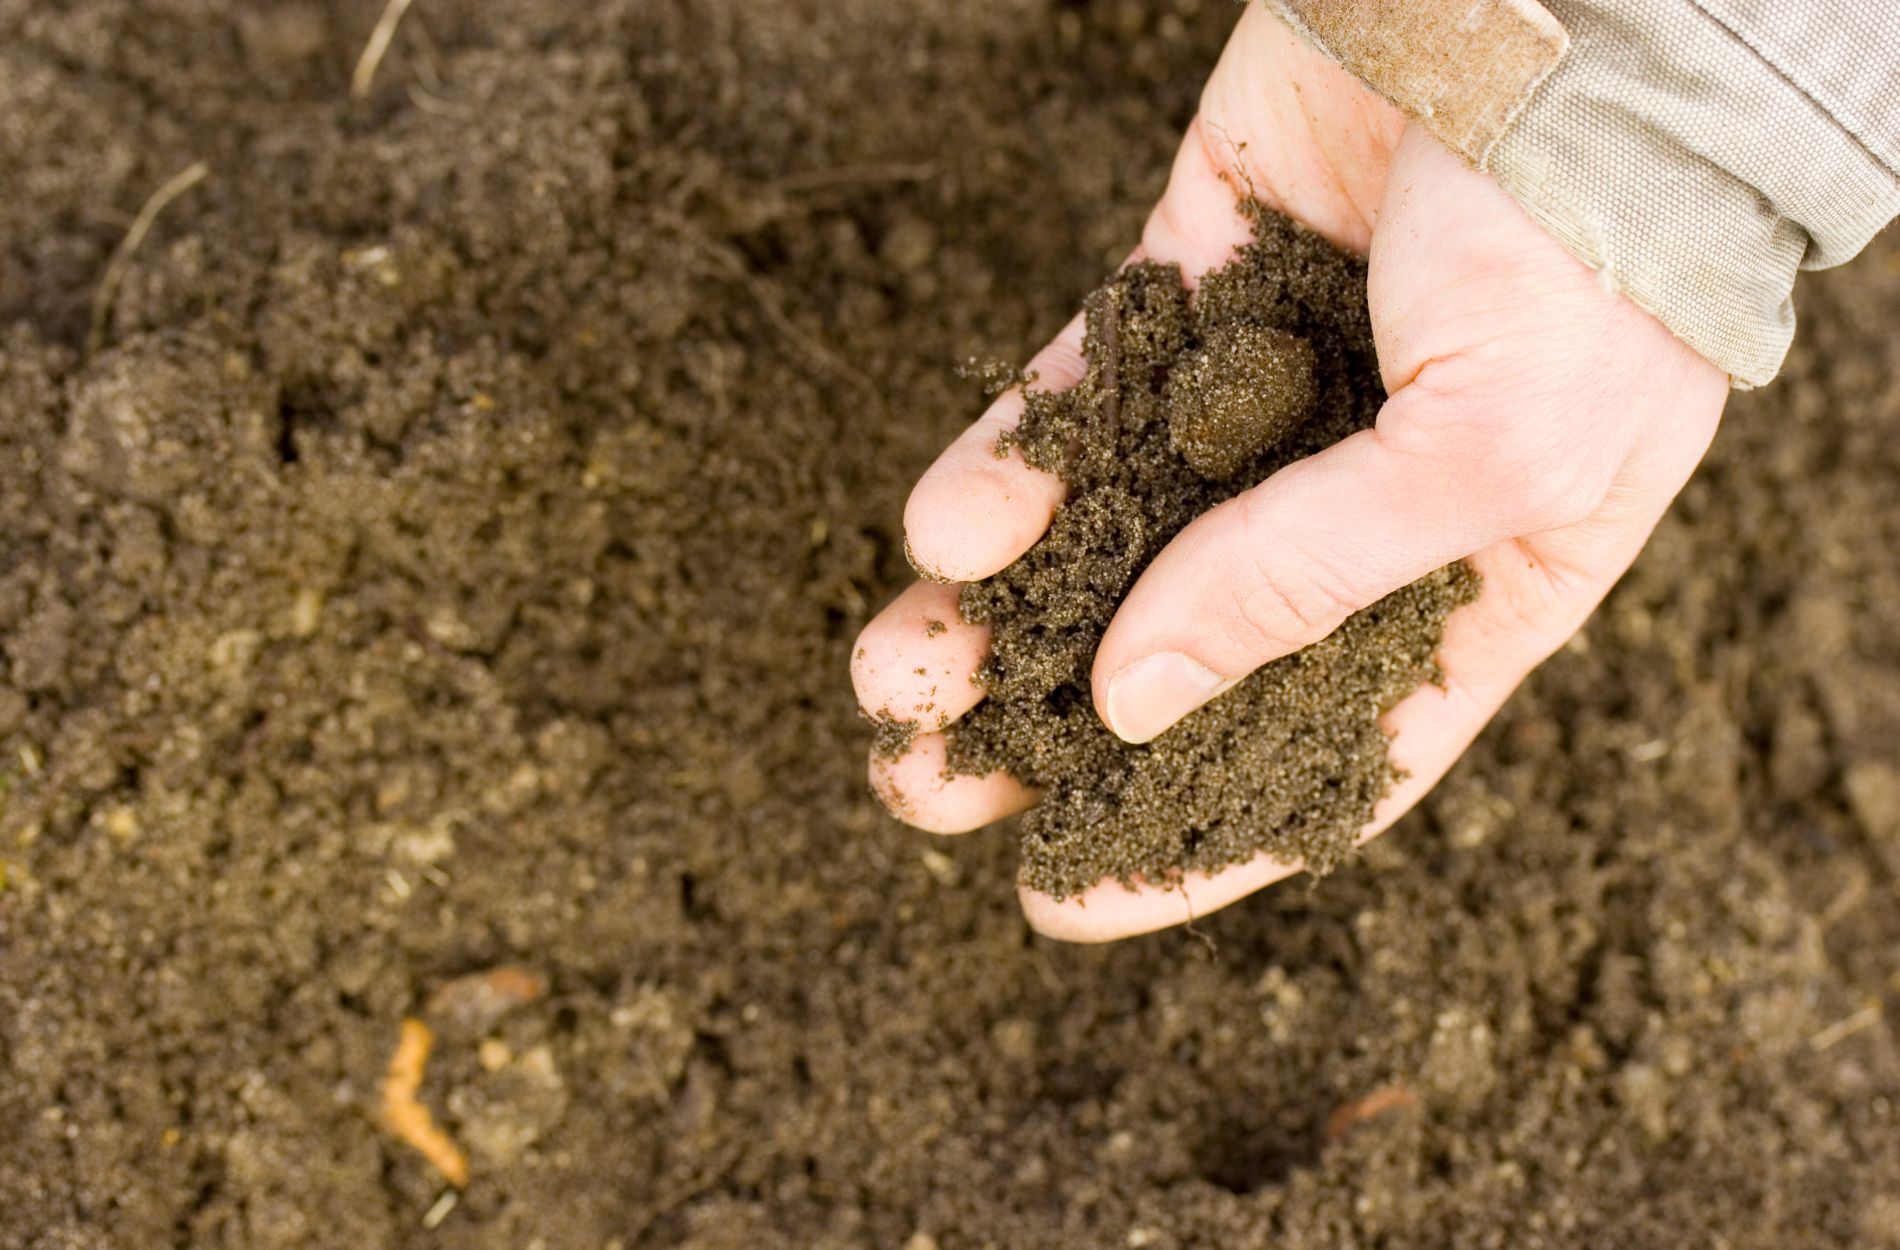 Contaminated Soil Hazards: The Importance of Soil Testing and Remediation